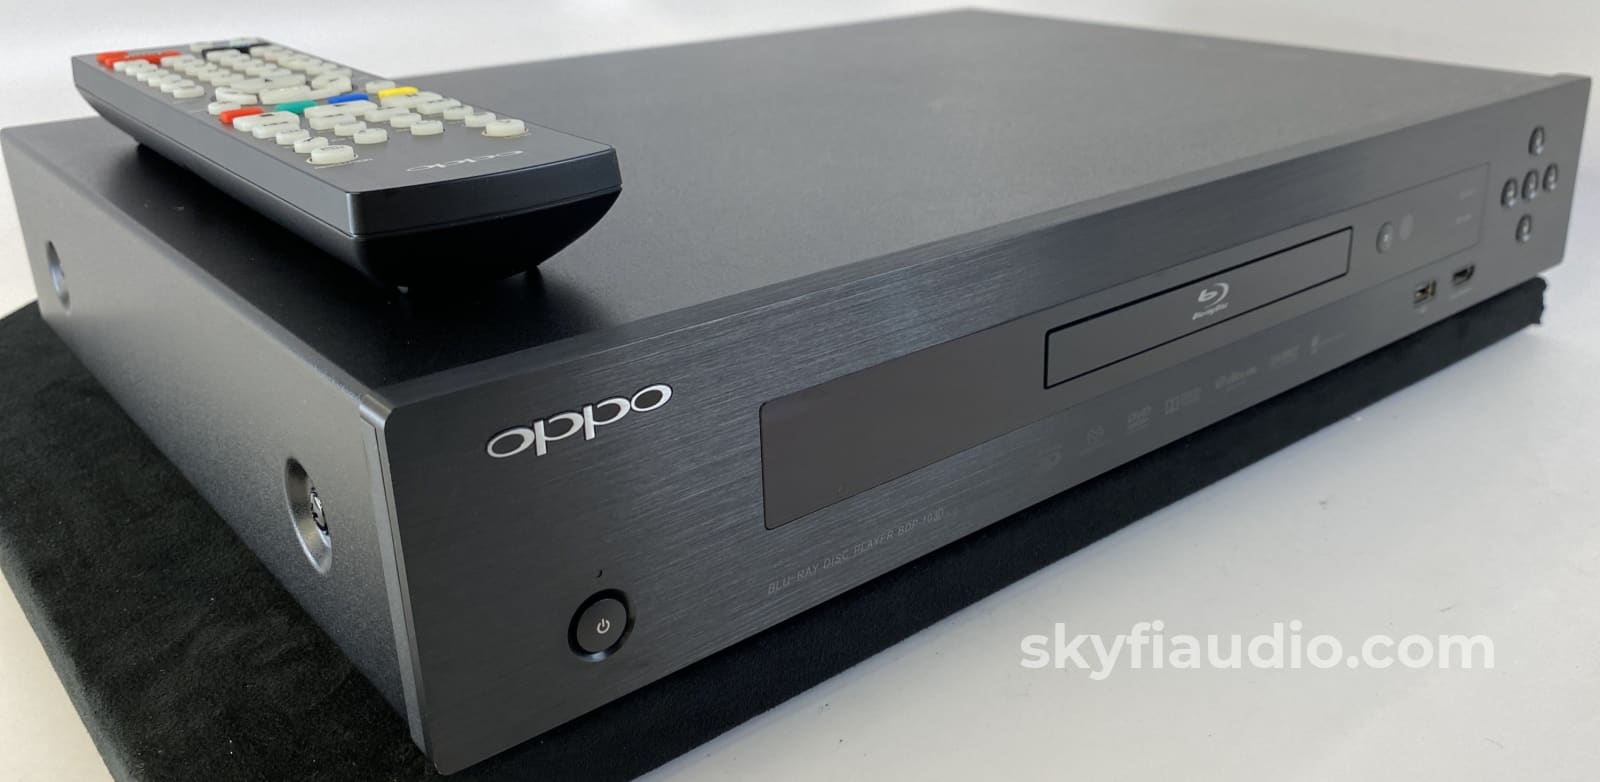 Oppo BDP-103D Darbee Edition SACD/CD/Blu-ray Player With Remote